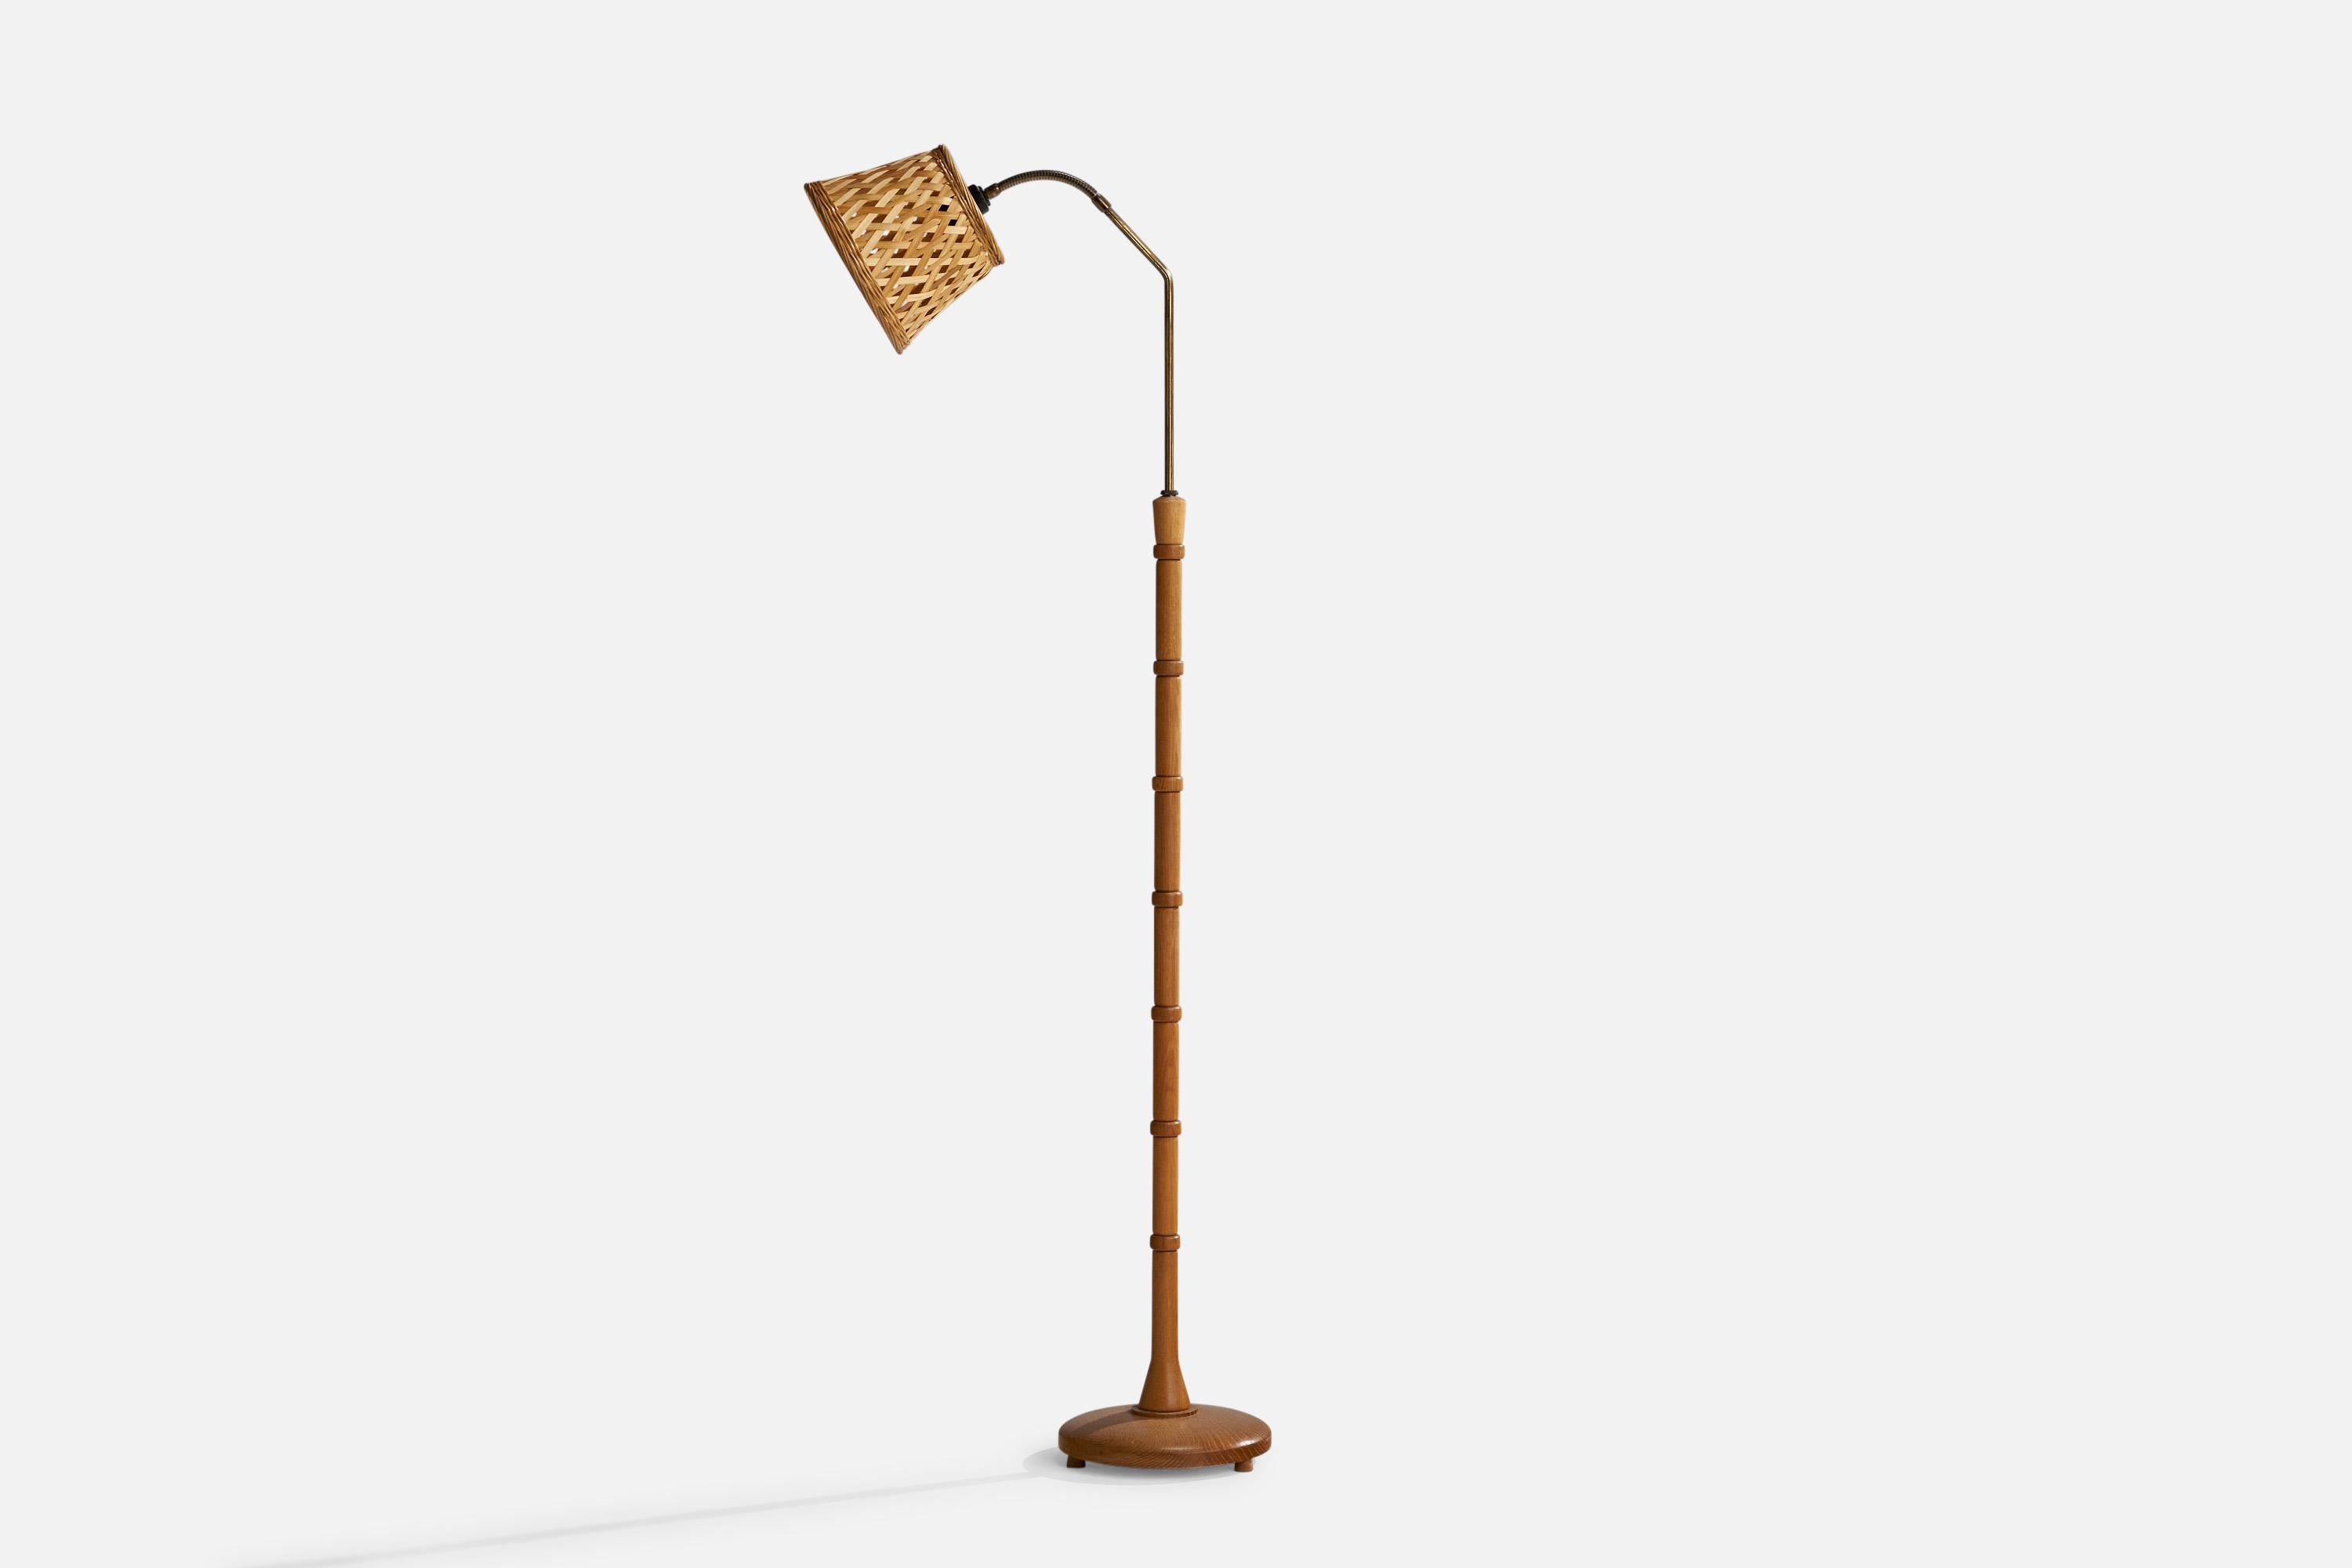 An adjustable oak, brass and rattan floor lamp designed and produced in Sweden, c. 1940s.

Dimensions variable
Overall Dimensions (inches): 52” H x 9.5” W x 19”  D
Stated dimensions include shade.
Bulb Specifications: E-26 Bulb
Number of Sockets: